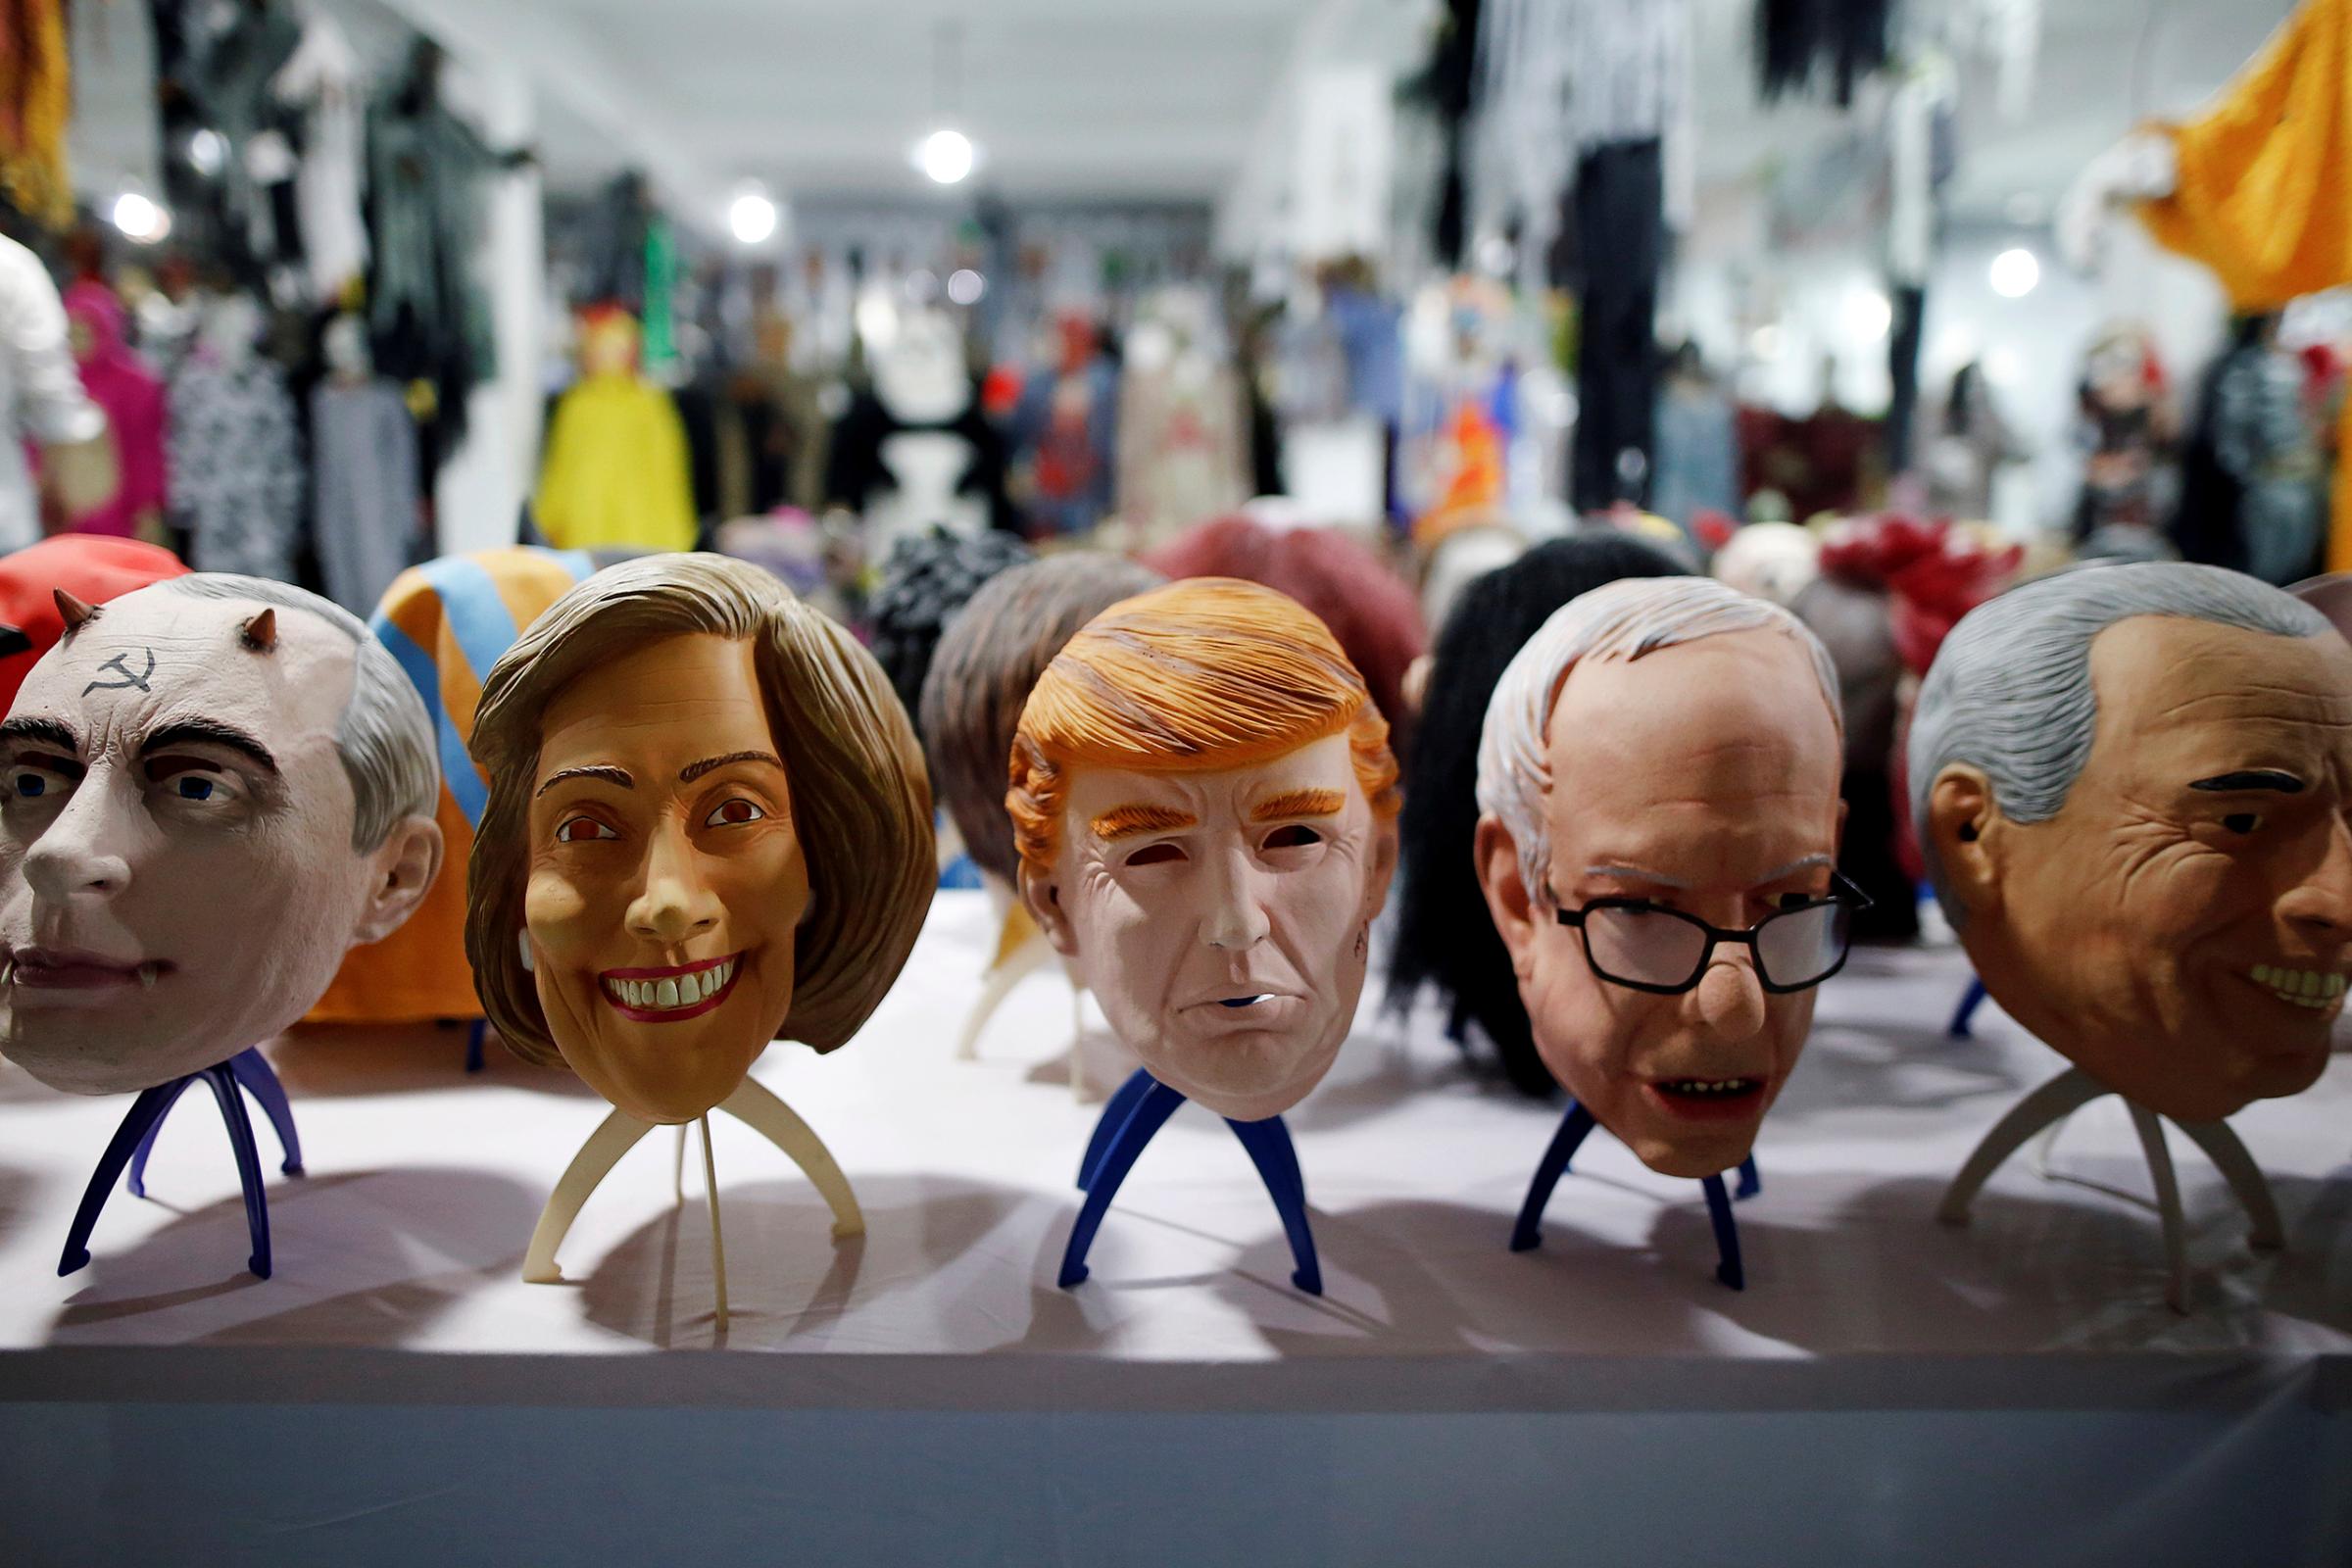 Masks of different politicians are displayed in the showroom of Jinhua Partytime Latex Art and Crafts Factory in Jinhua, Zhejiang Province, China, May 25, 2016.